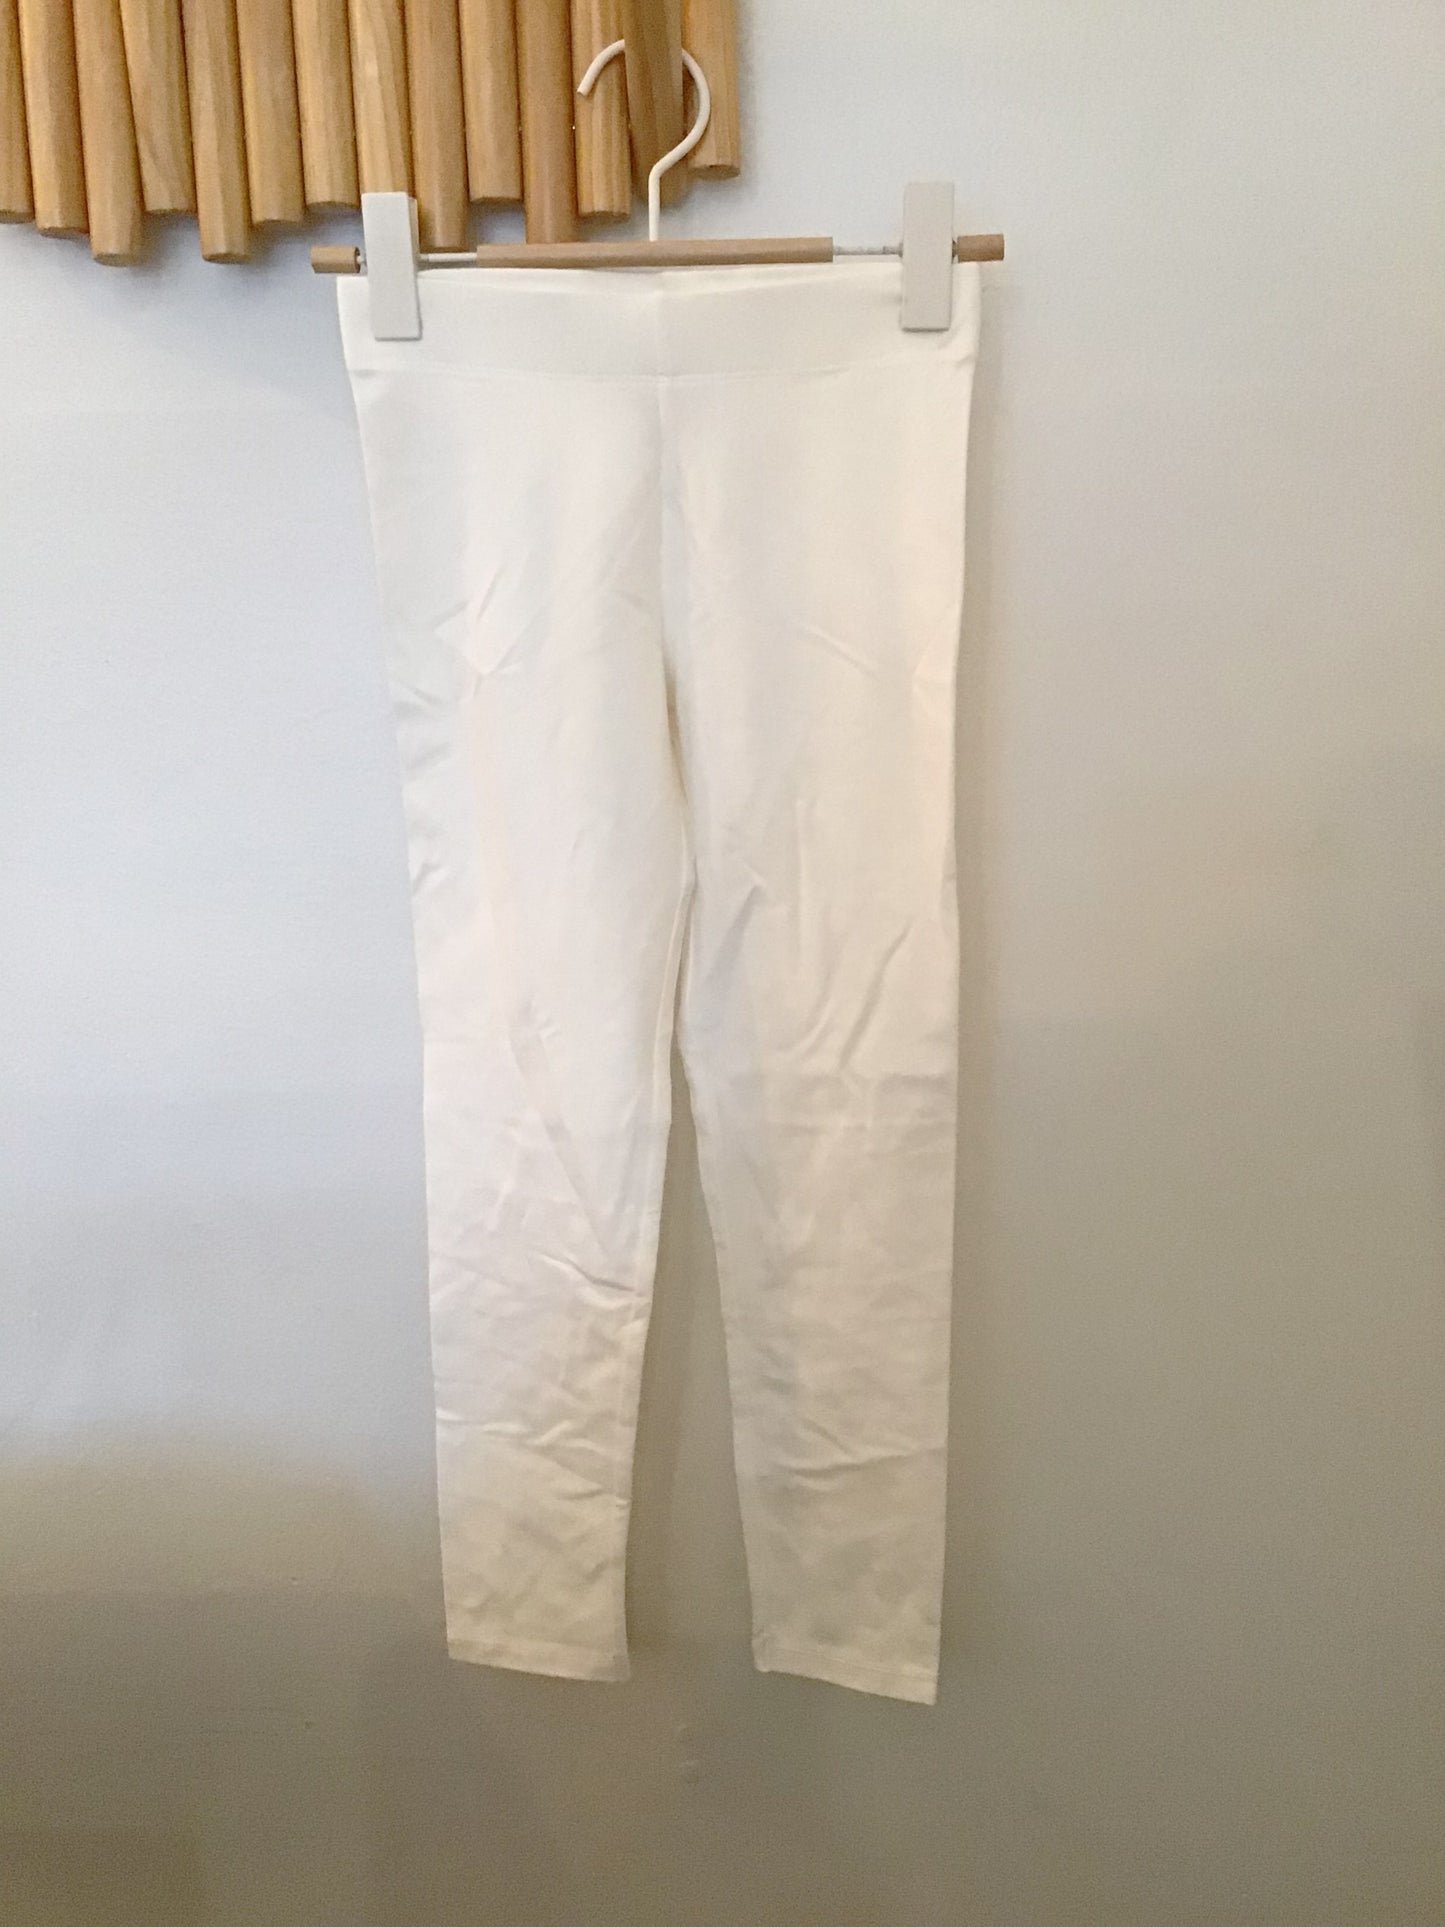 White leggings 9-10y new without tags